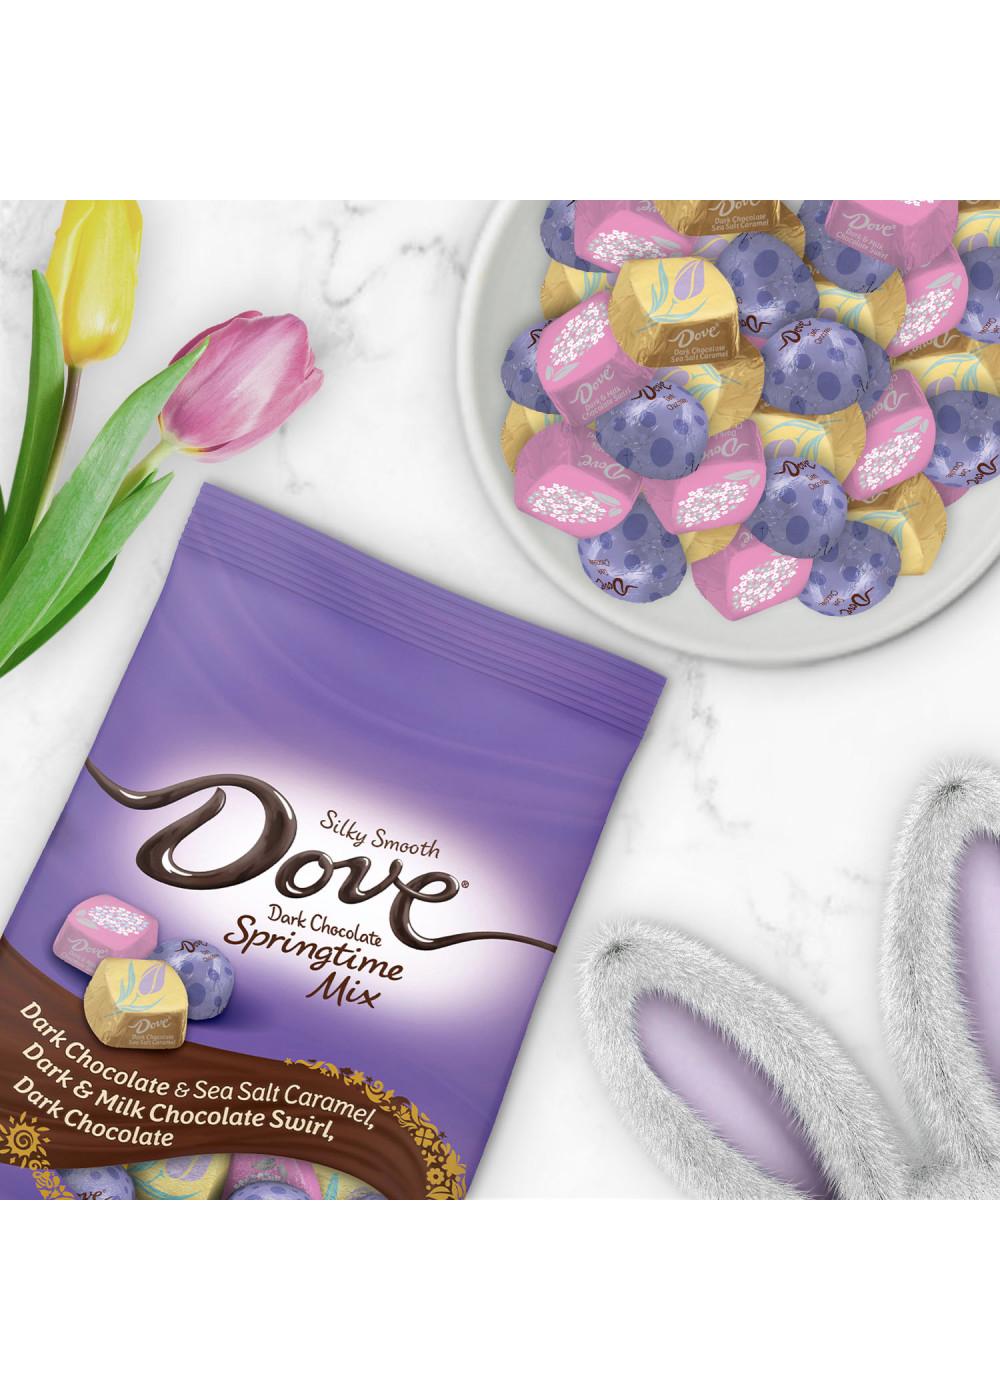 Dove Dark Chocolate Springtime Mix Easter Candy; image 7 of 7